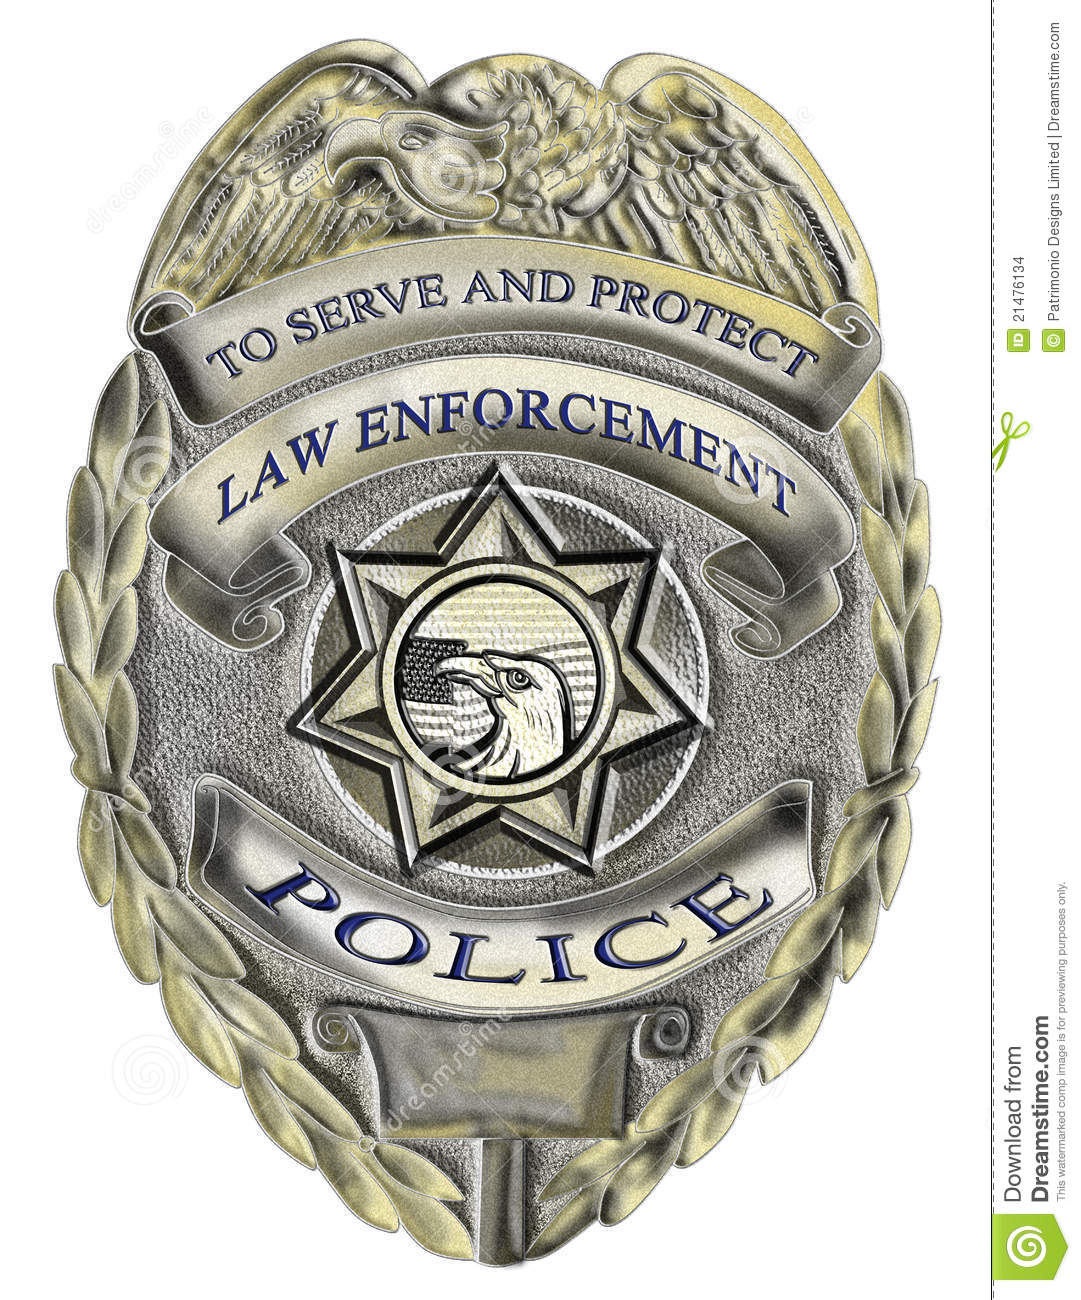 Sheriff Law Enforcement Police Badge Stock Images   Image  21476134